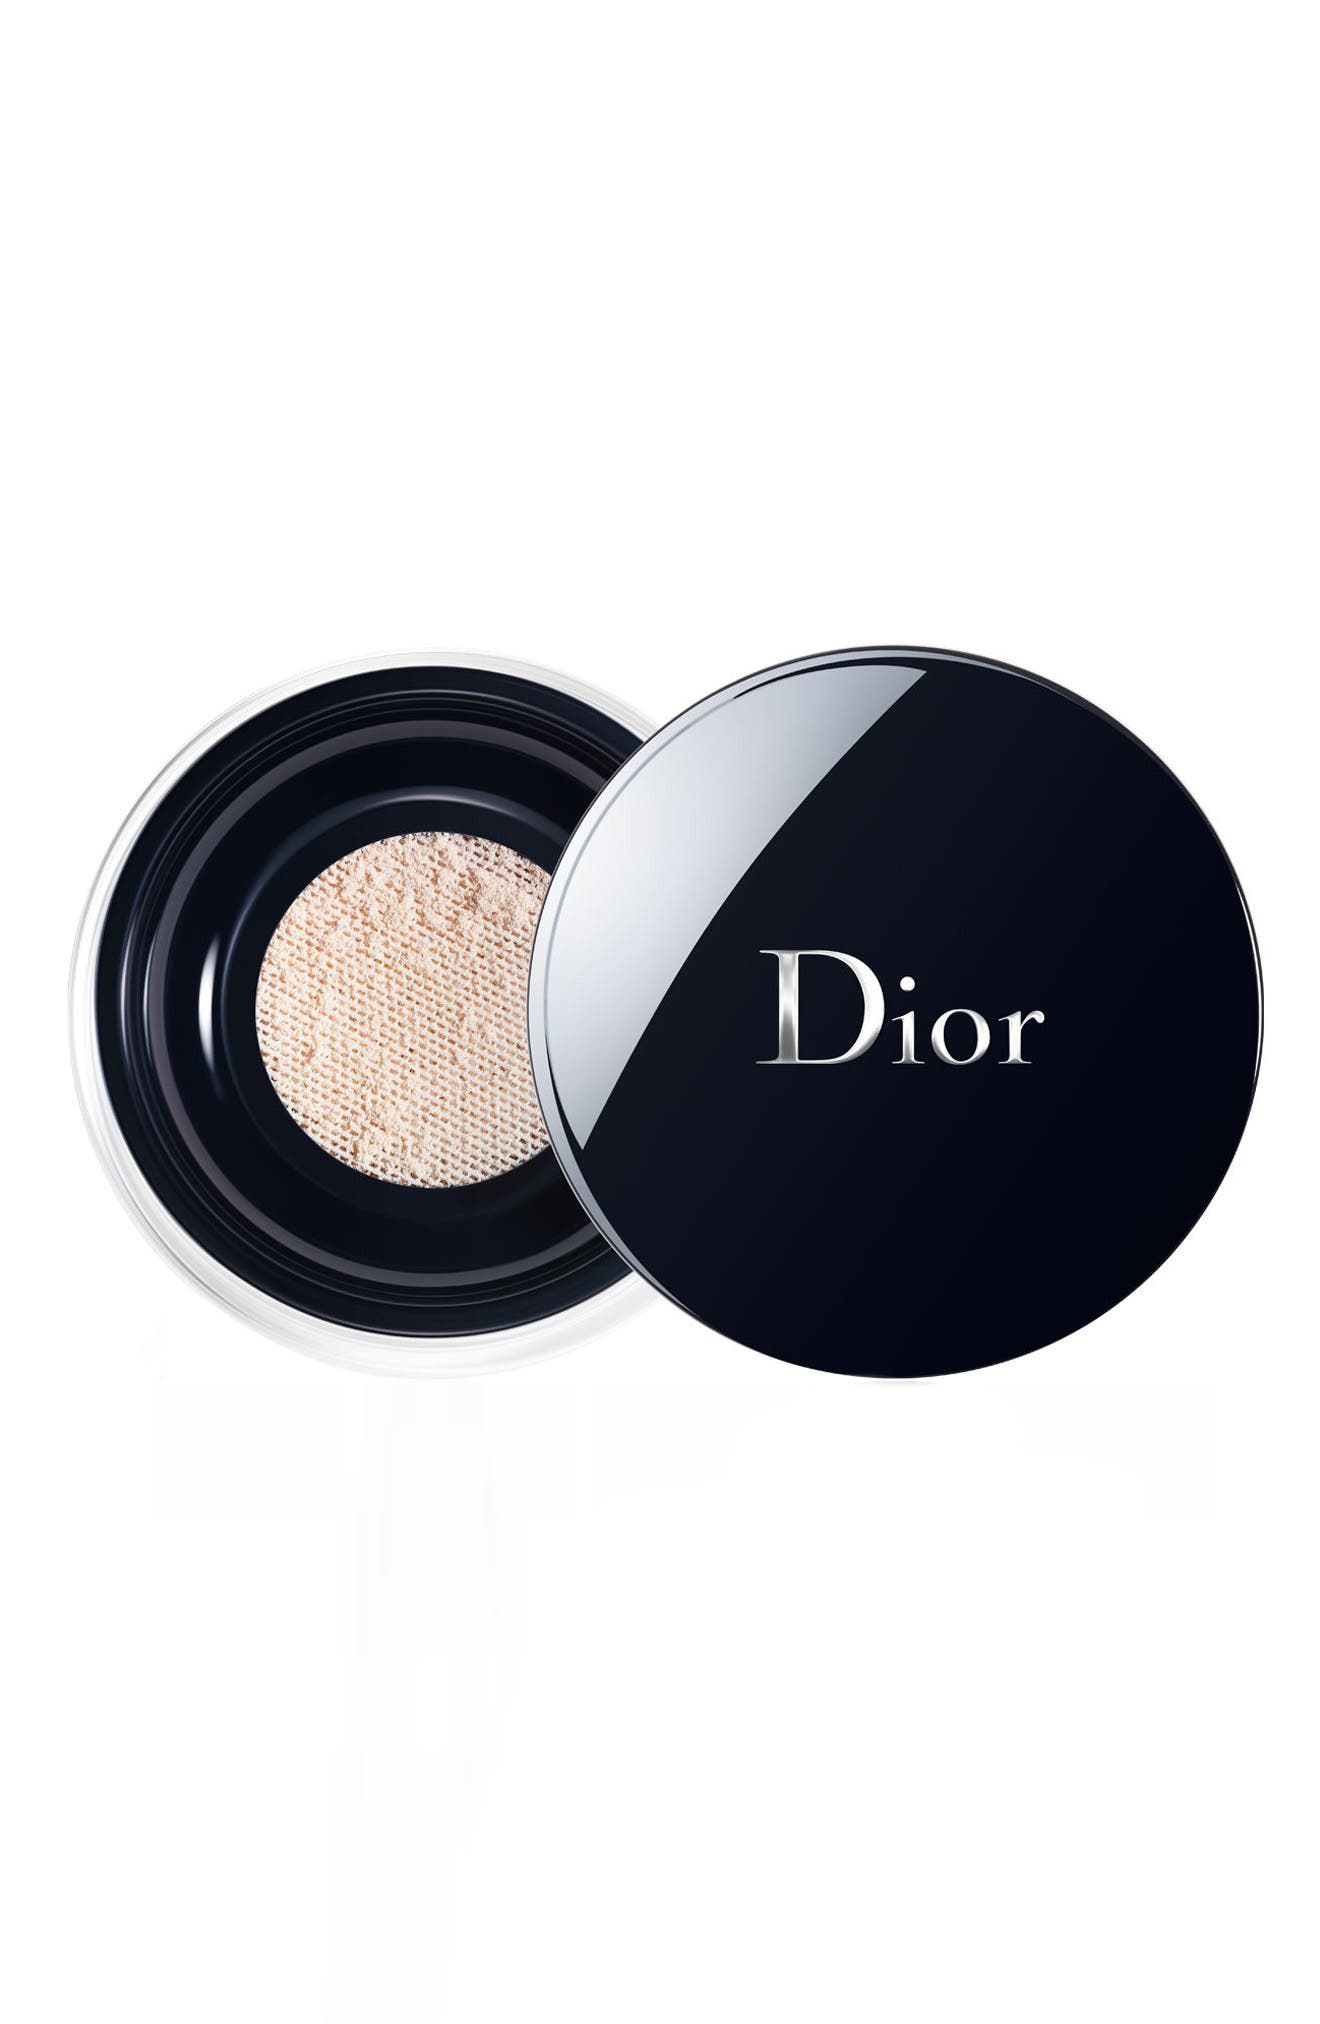 EAN 3348901282680 product image for Dior Diorskin Forever & Ever Control Extreme Perfection Matte Finish Invisible L | upcitemdb.com